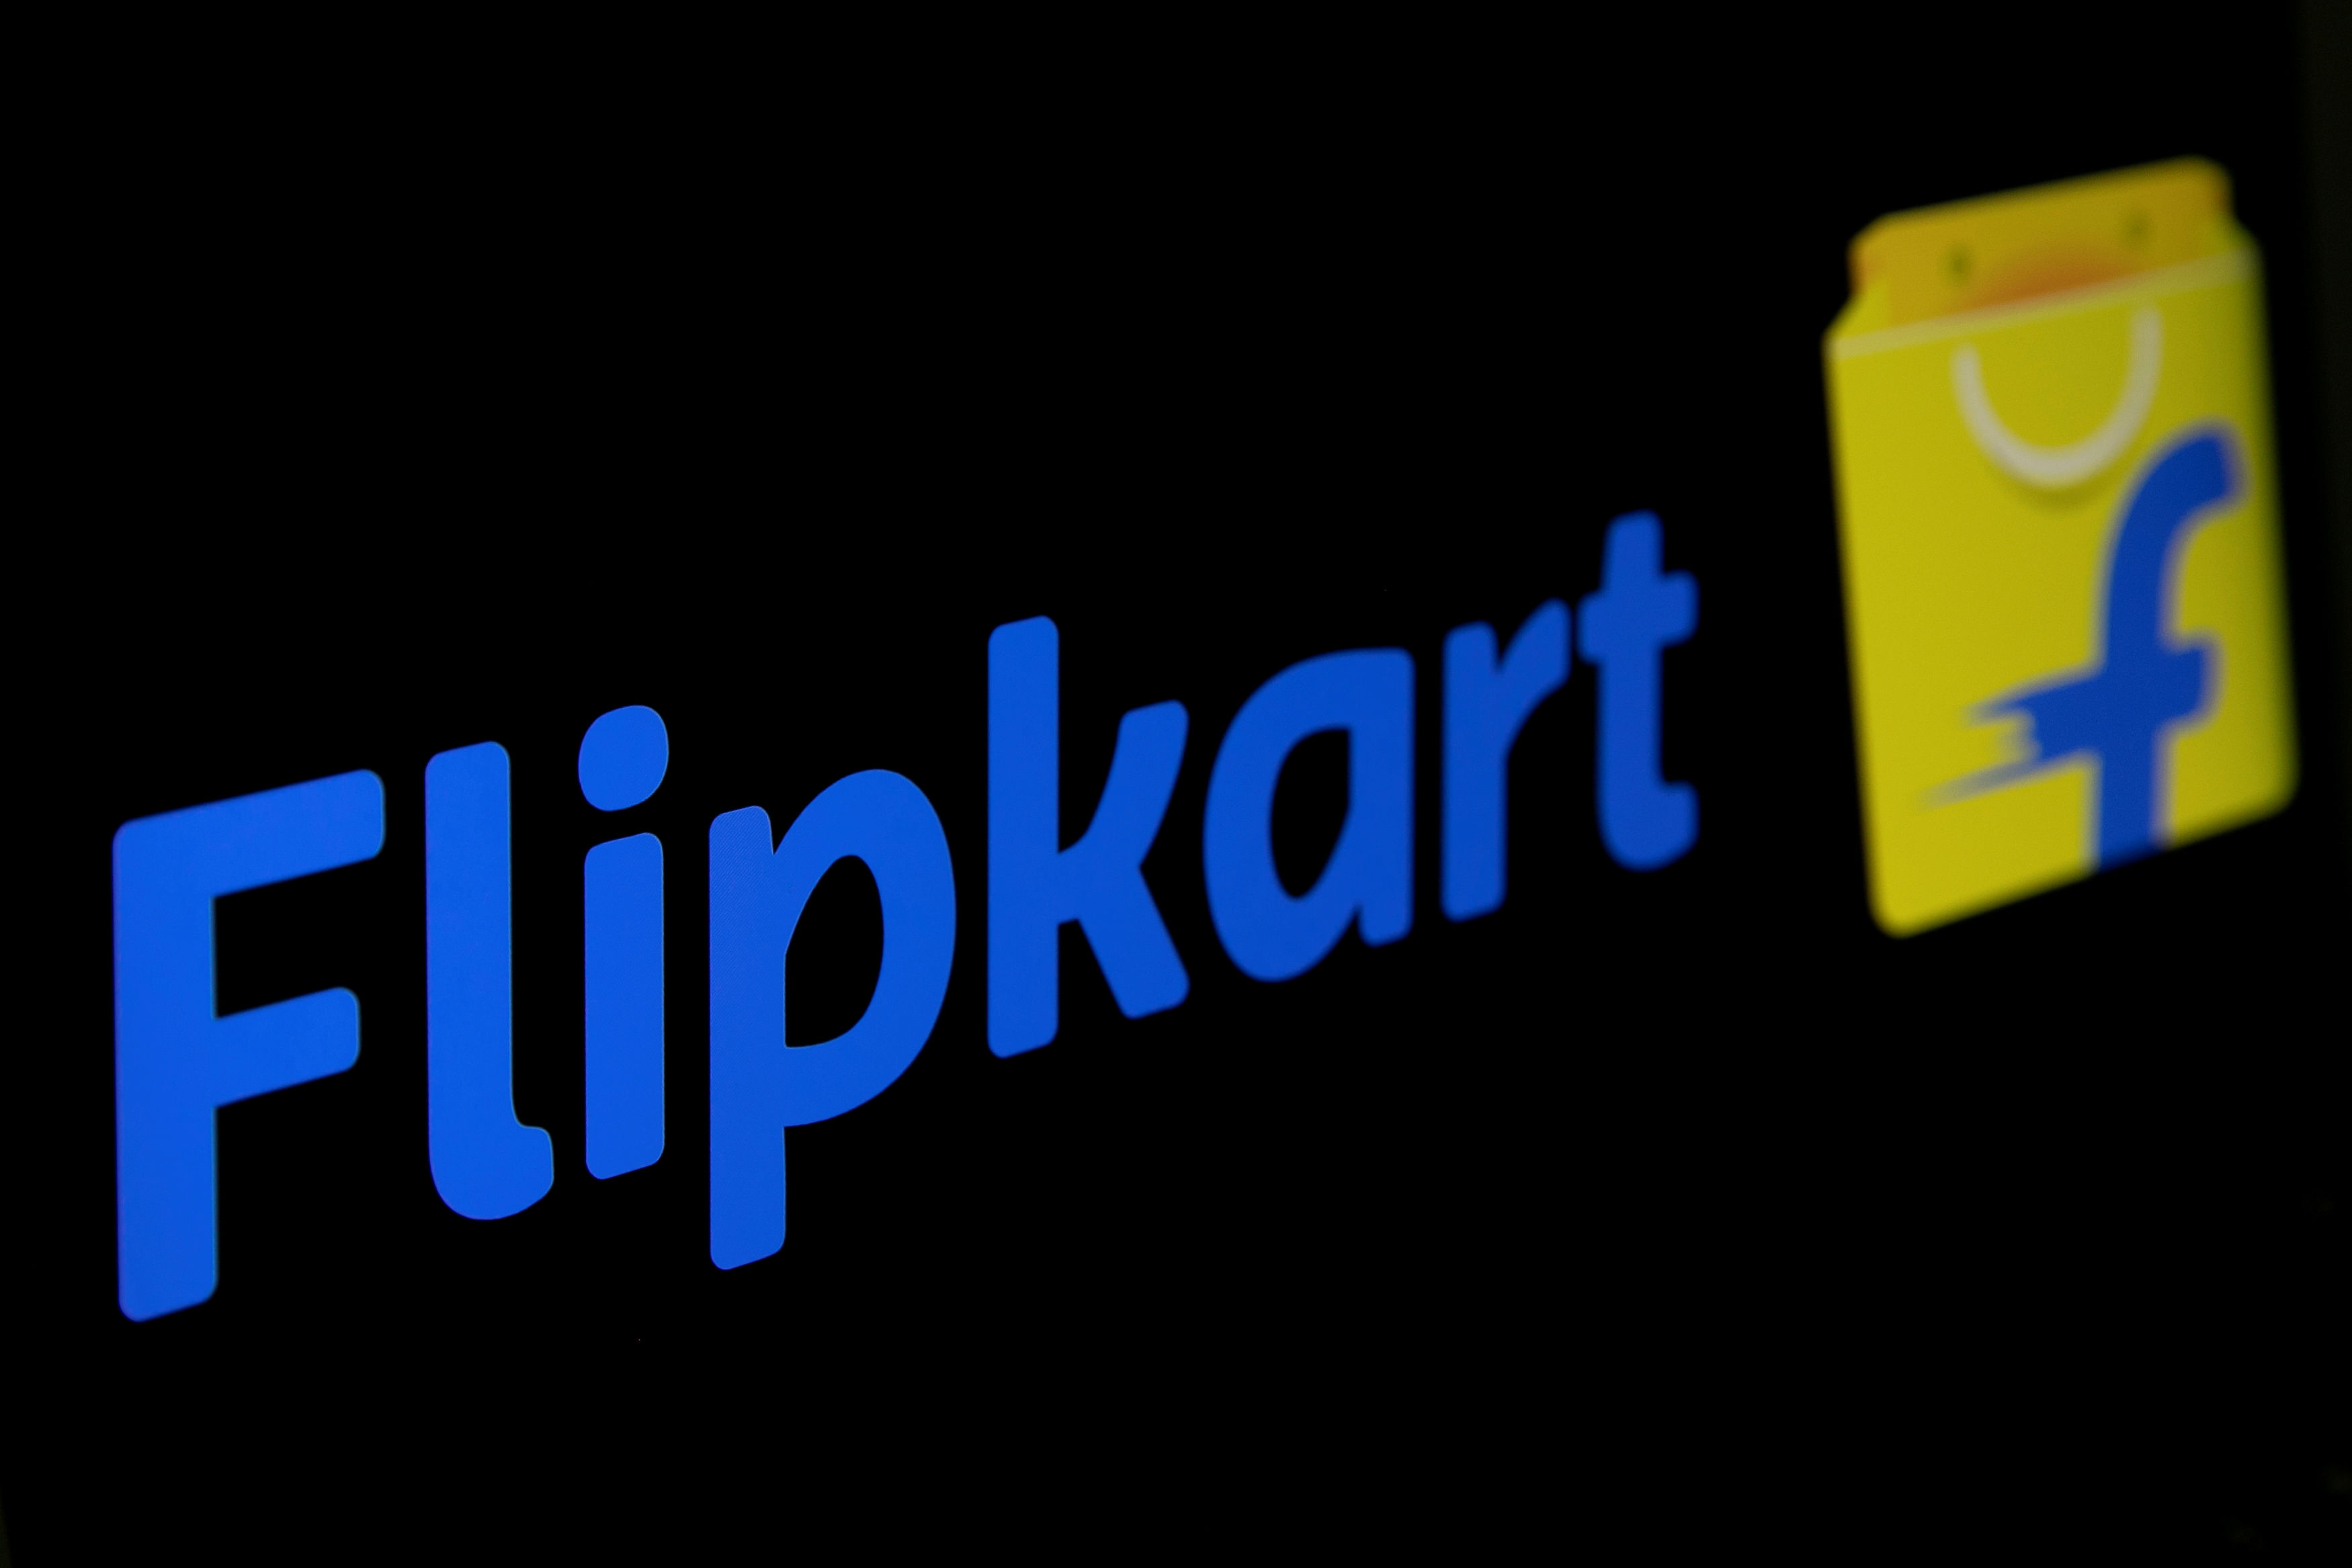 The logo of India's e-commerce firm Flipkart is seen in this illustration picture taken January 29, 2019. (Credit: Reuters Photo)